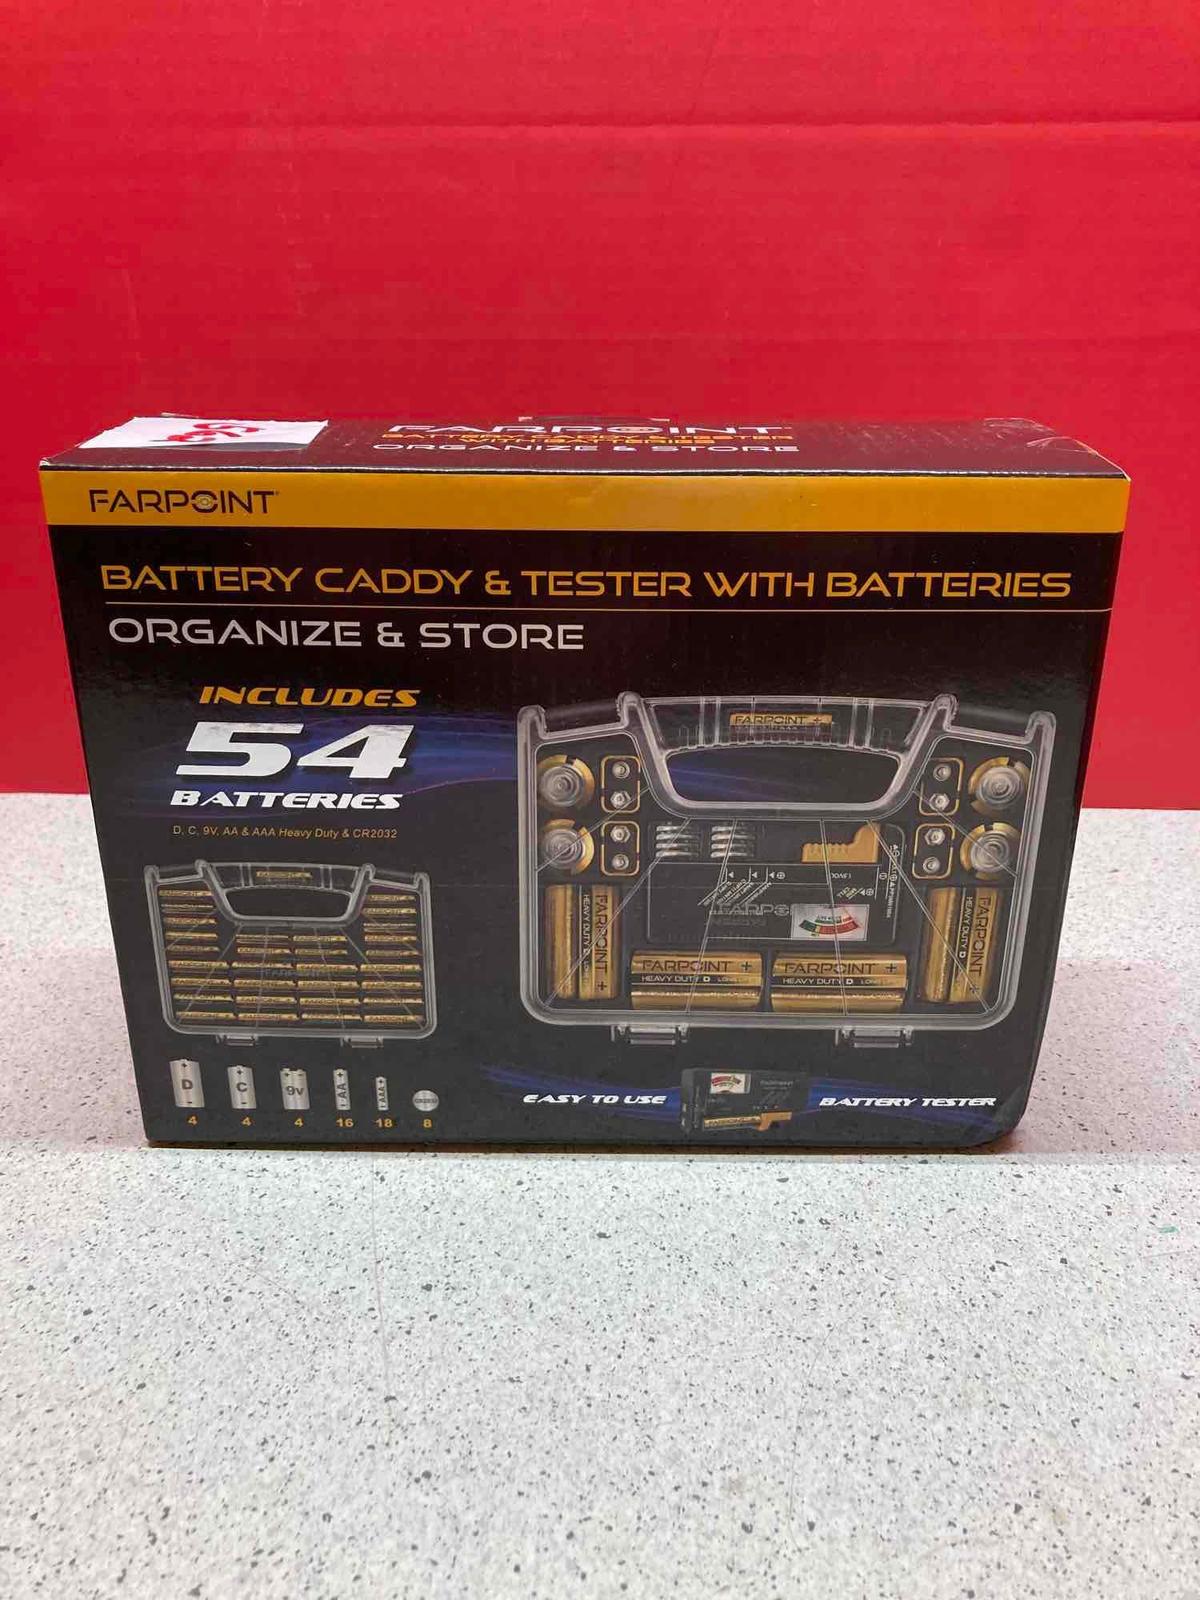 New farpoint battery caddy and tester with batteries